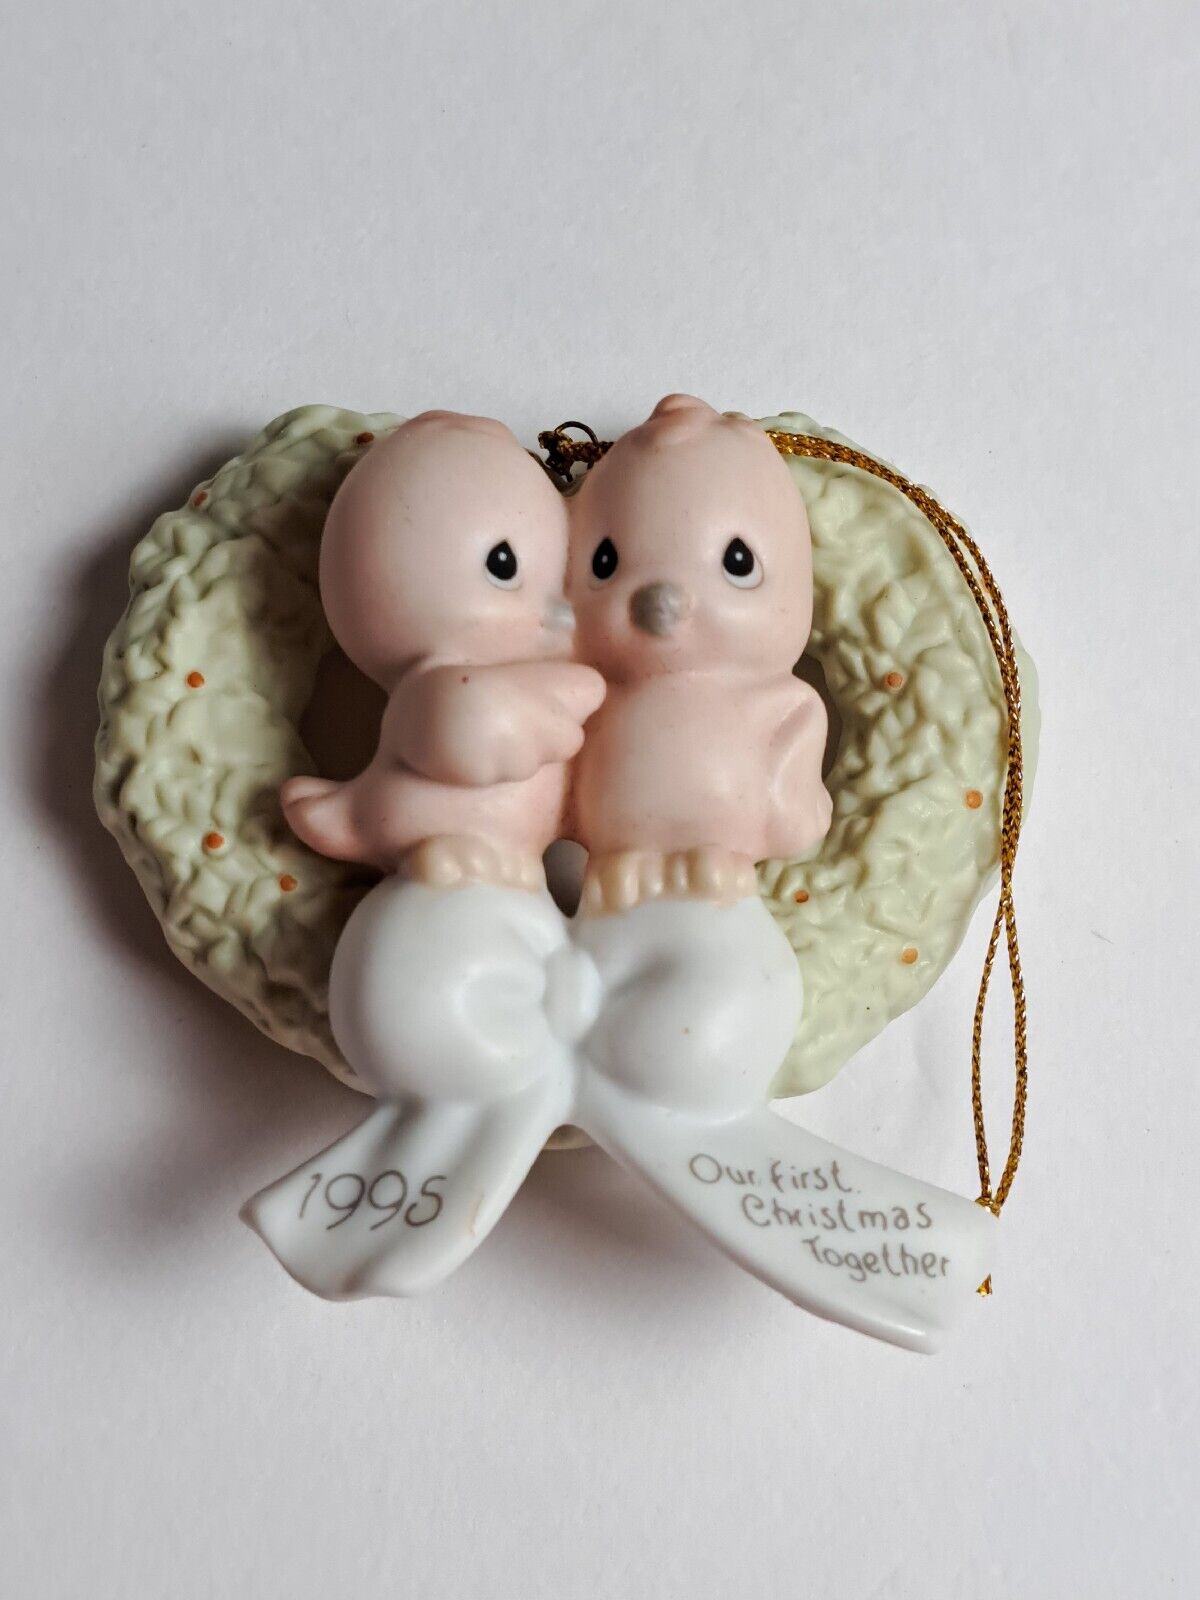 Vintage 1995 Enesco Precious Twins First Christmas Together Ornament Twin Baby 